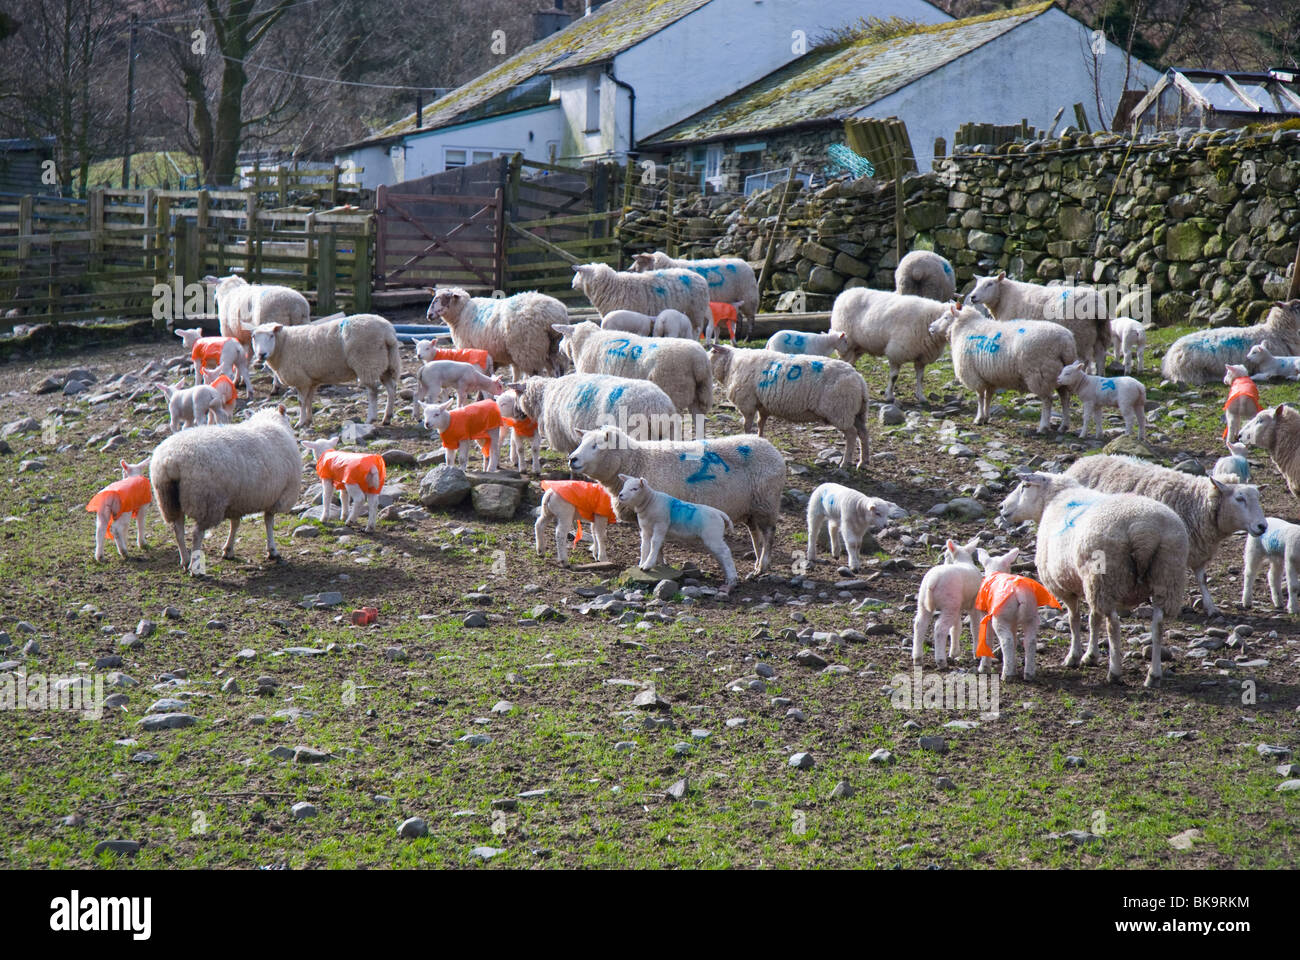 Numbered sheep and lambs in plastic coats on a farm in Cumbria Stock Photo